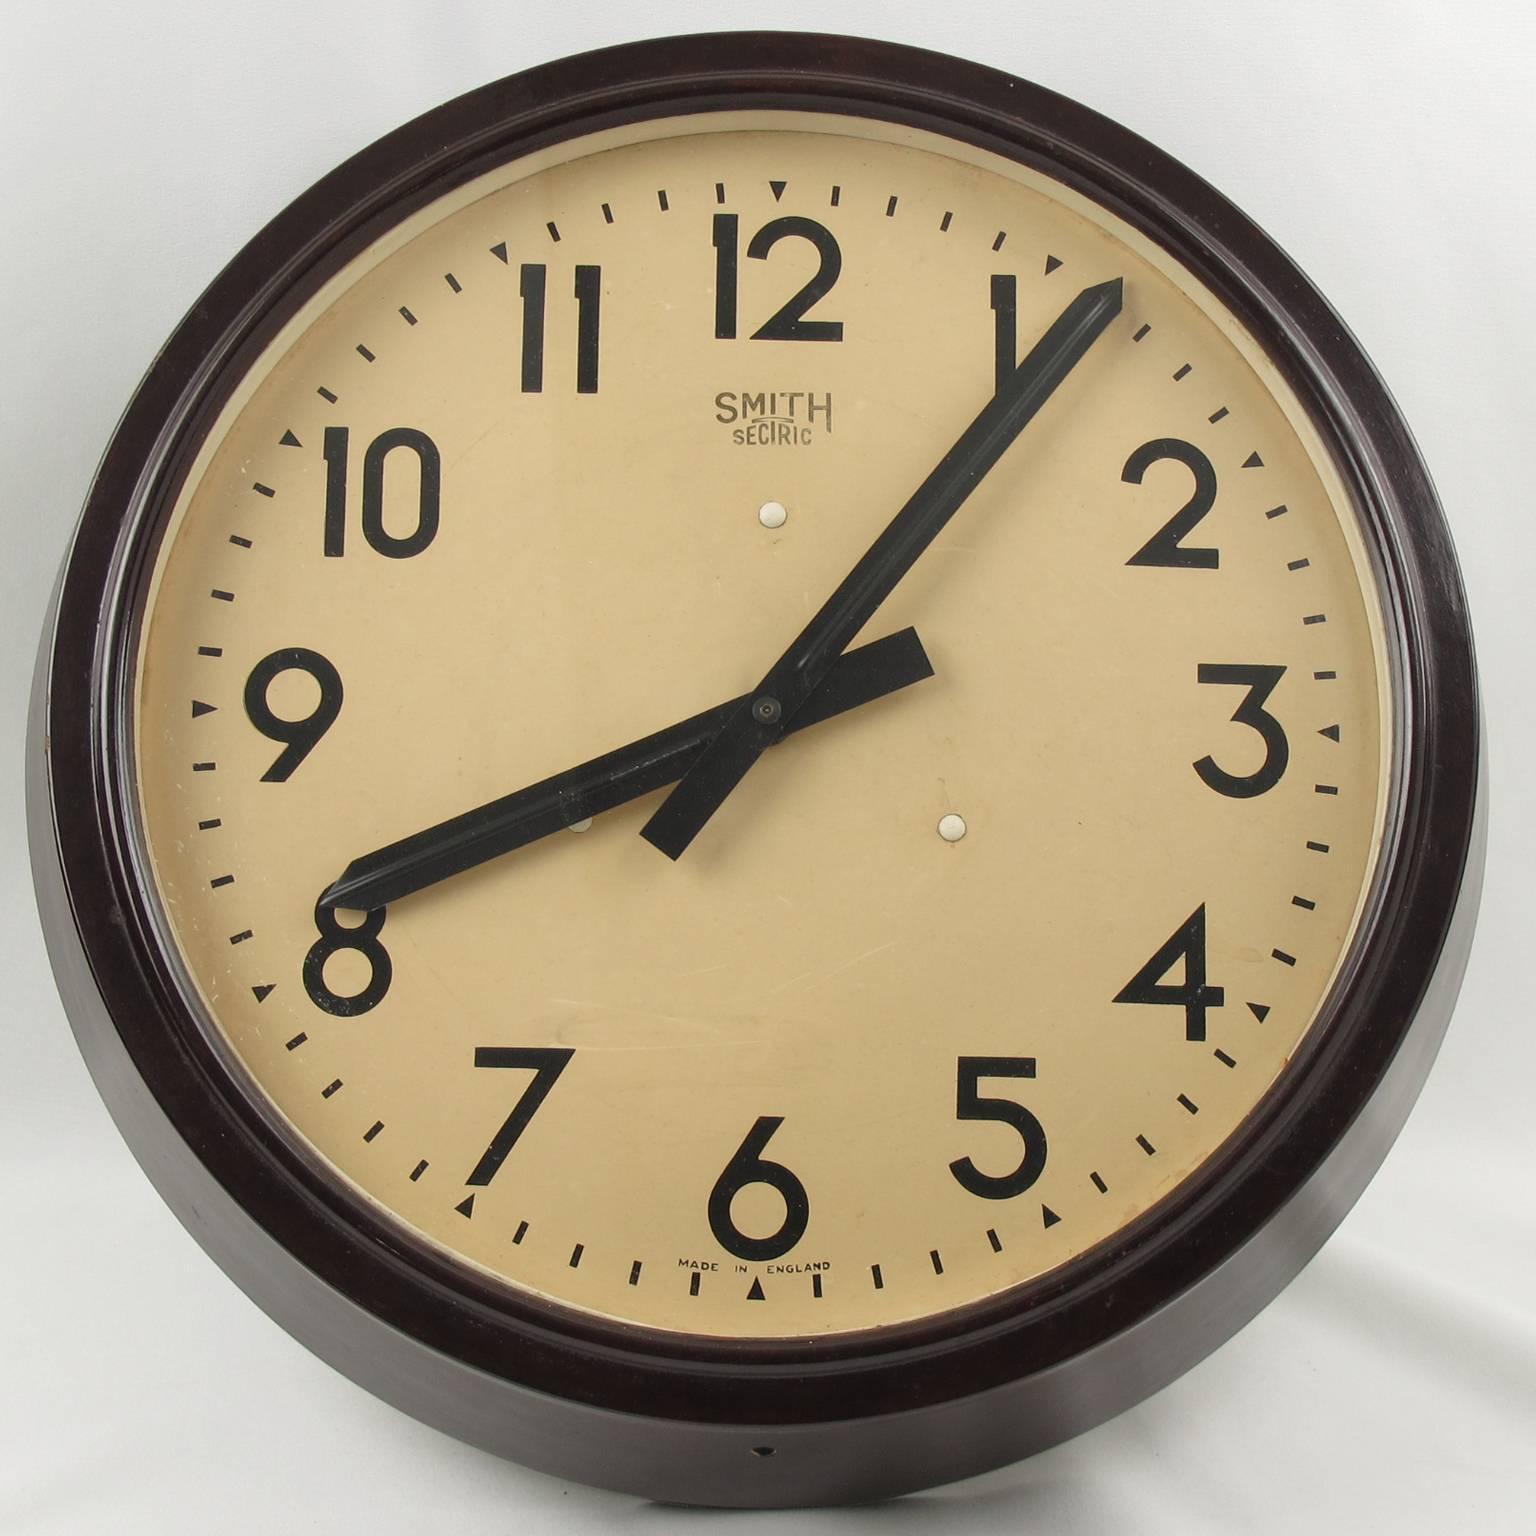 Huge industrial Art Deco wall clock by Smith, England. Brown marble Bakelite frame. Clock face protected with glass. This very nice clock is in perfect working condition. Formerly an electric clock, it is now fitted with a replacement modern quartz